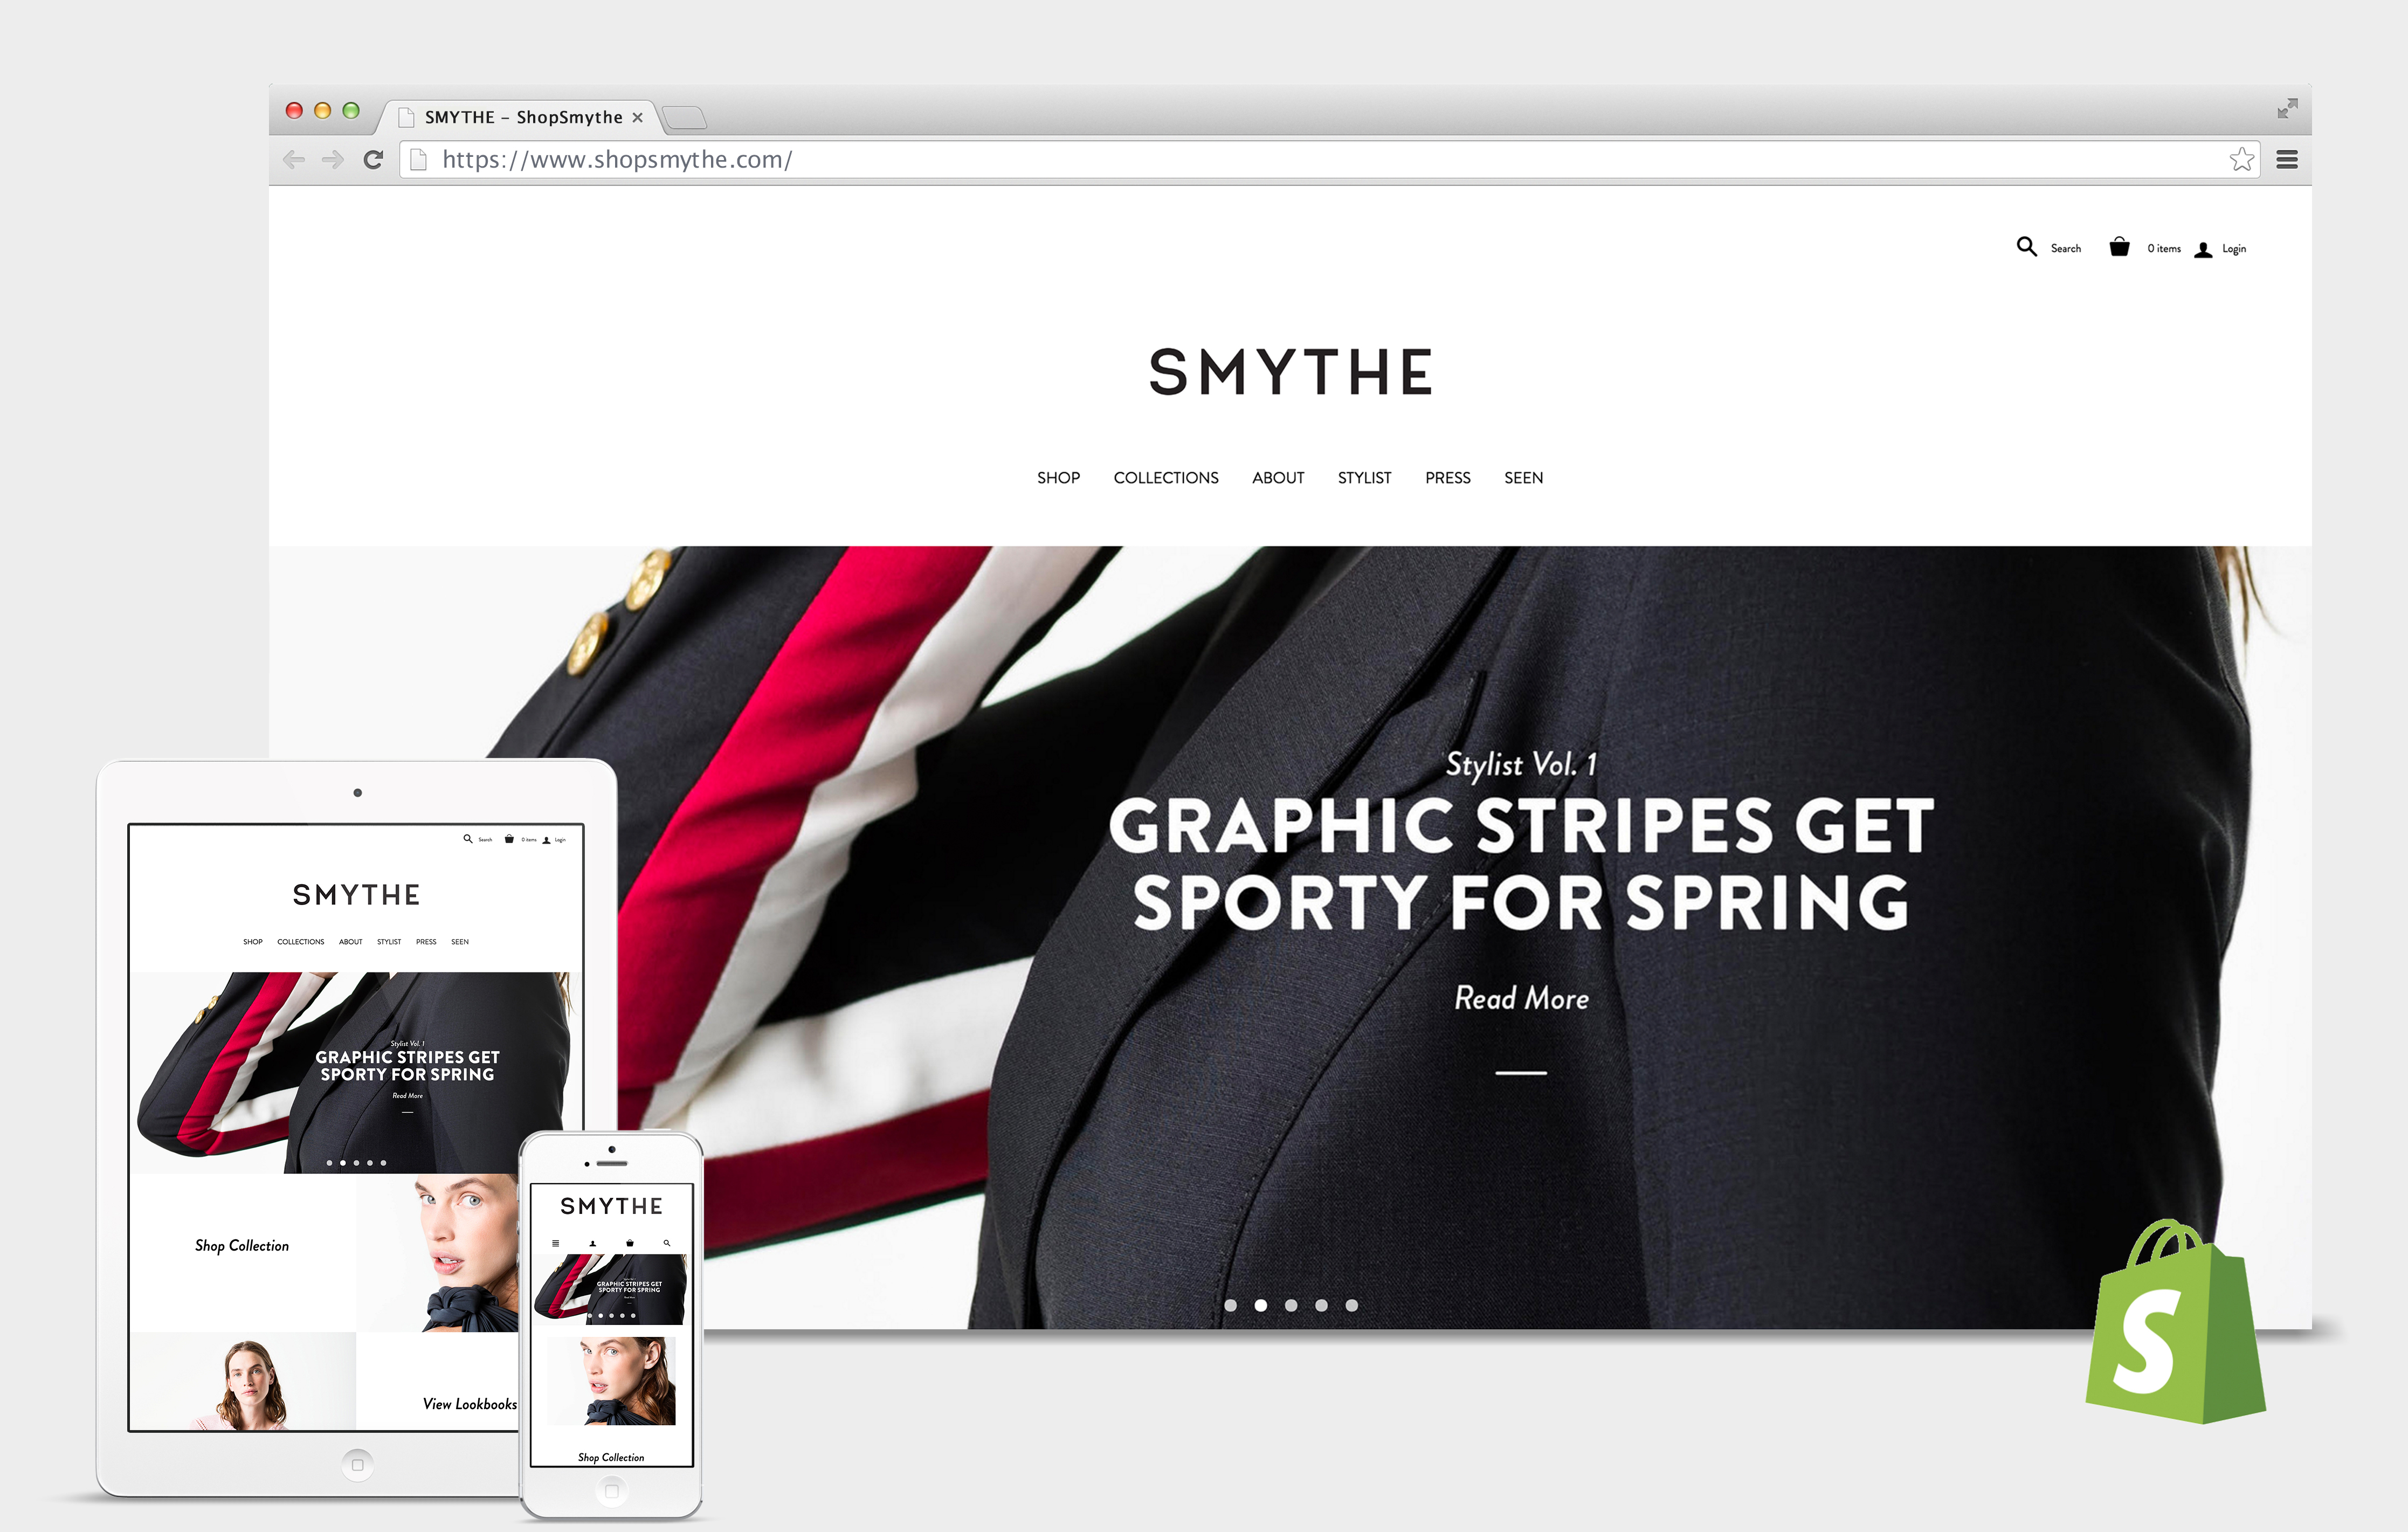 Mock up devices with the SMYTHE website on them. Features a desktop view, tablet view, and phone view.